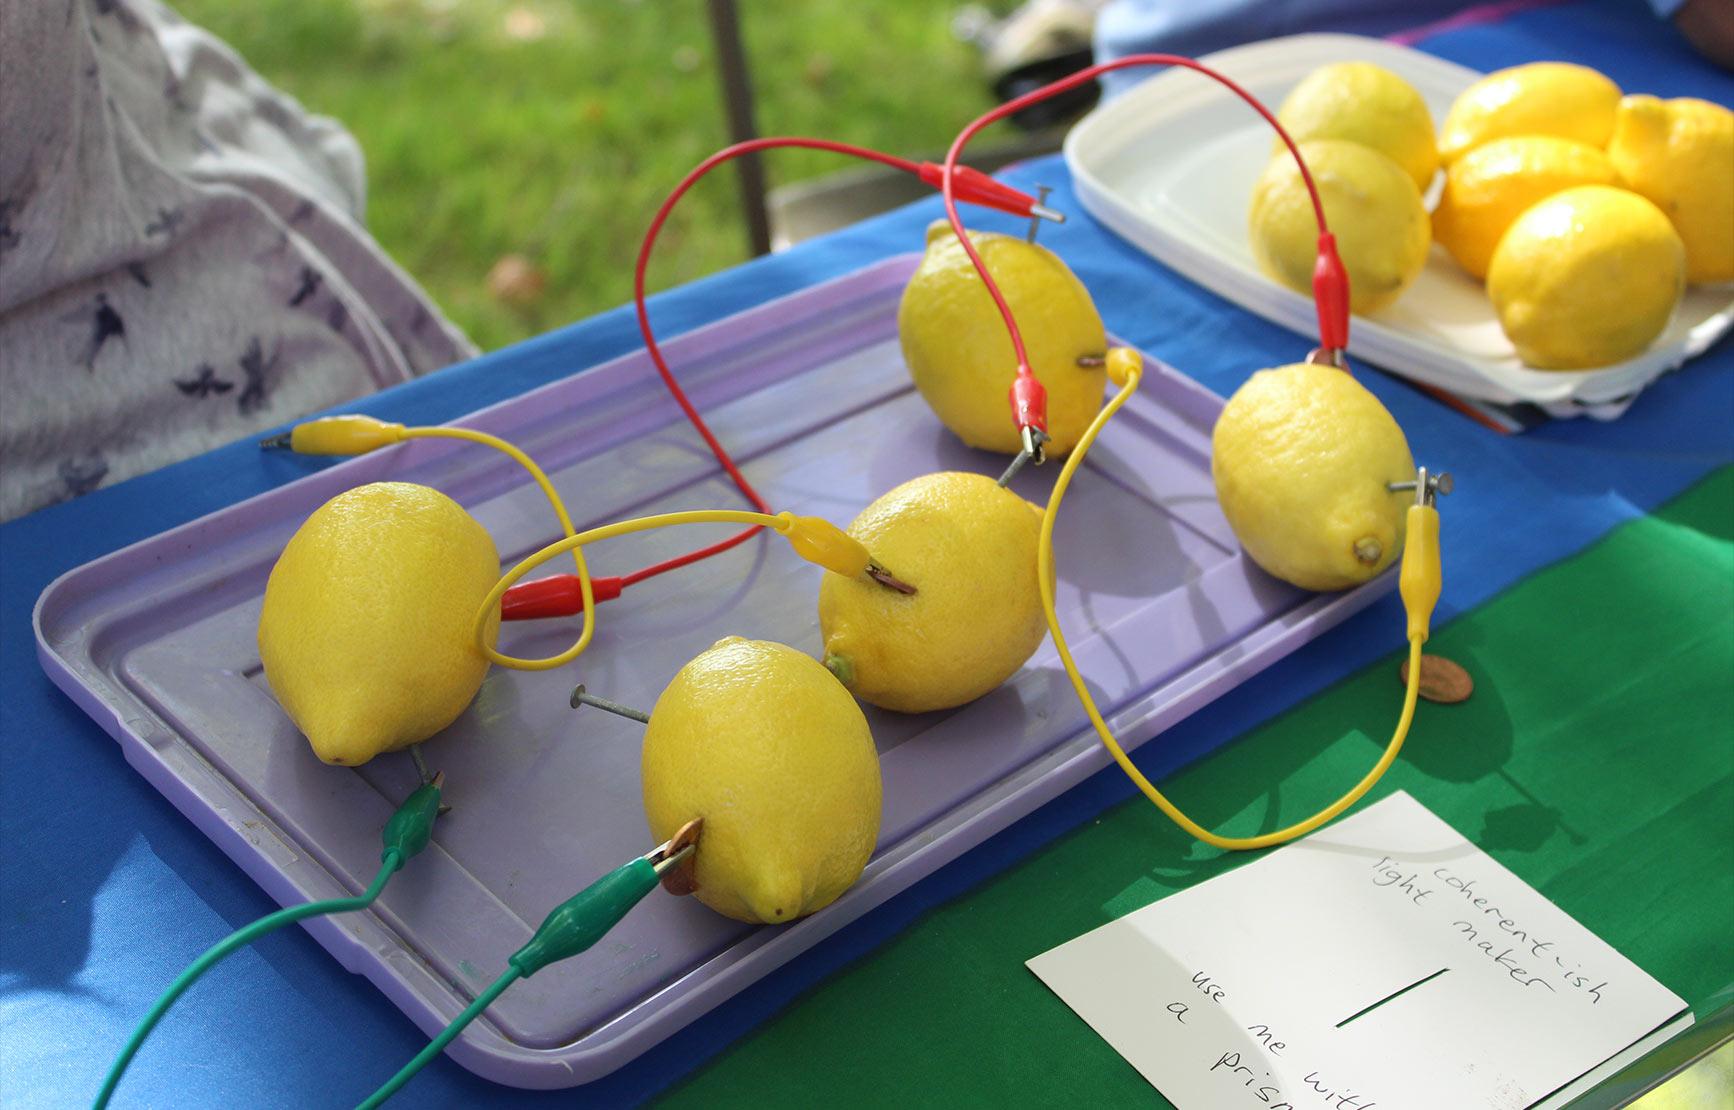 Lemons wired up for a science experiment at a club booth.